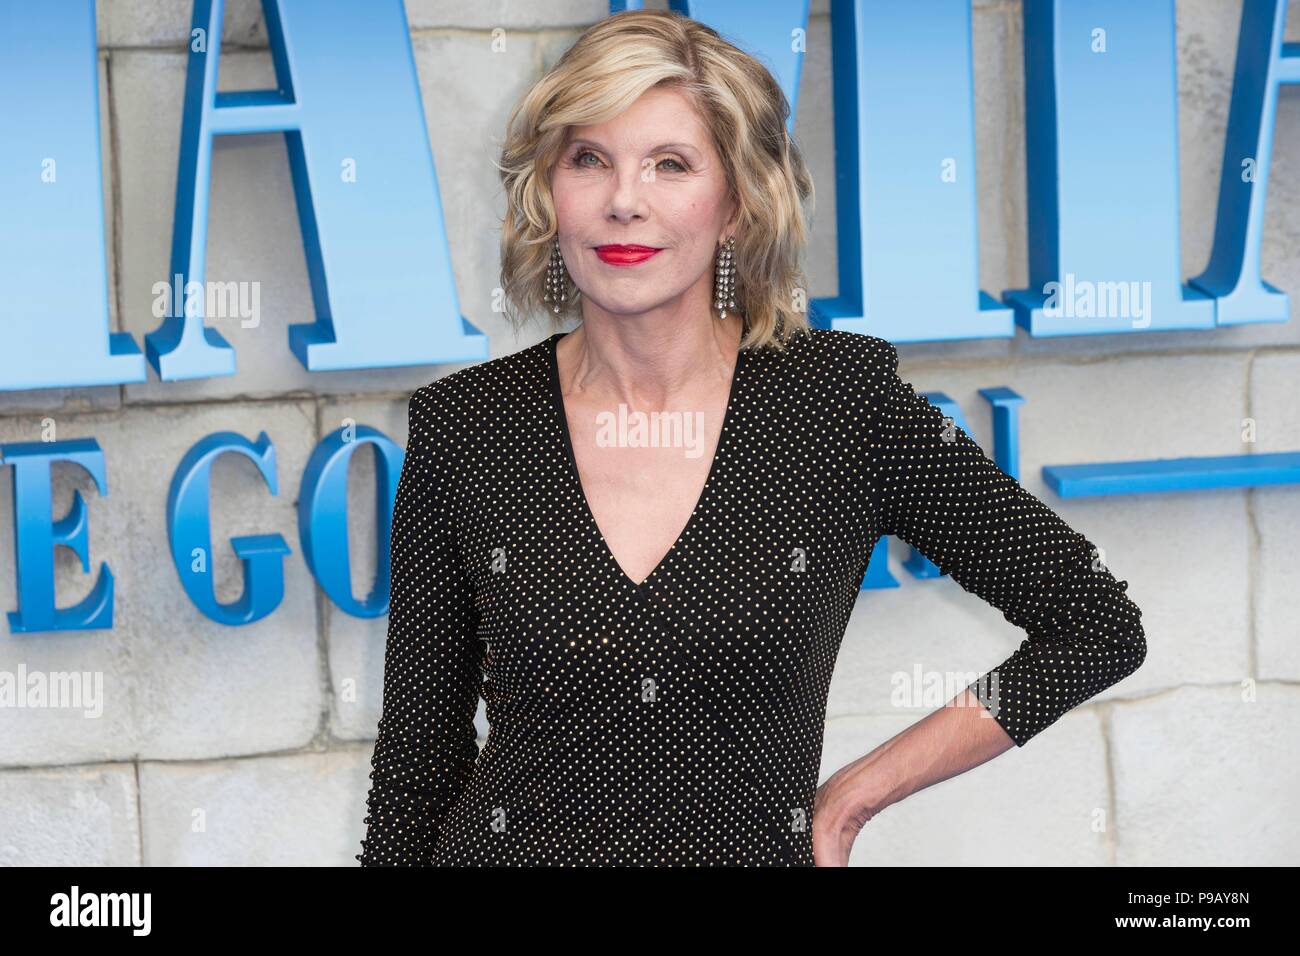 Page 3 - Baranski High Resolution Stock Photography and Images - Alamy